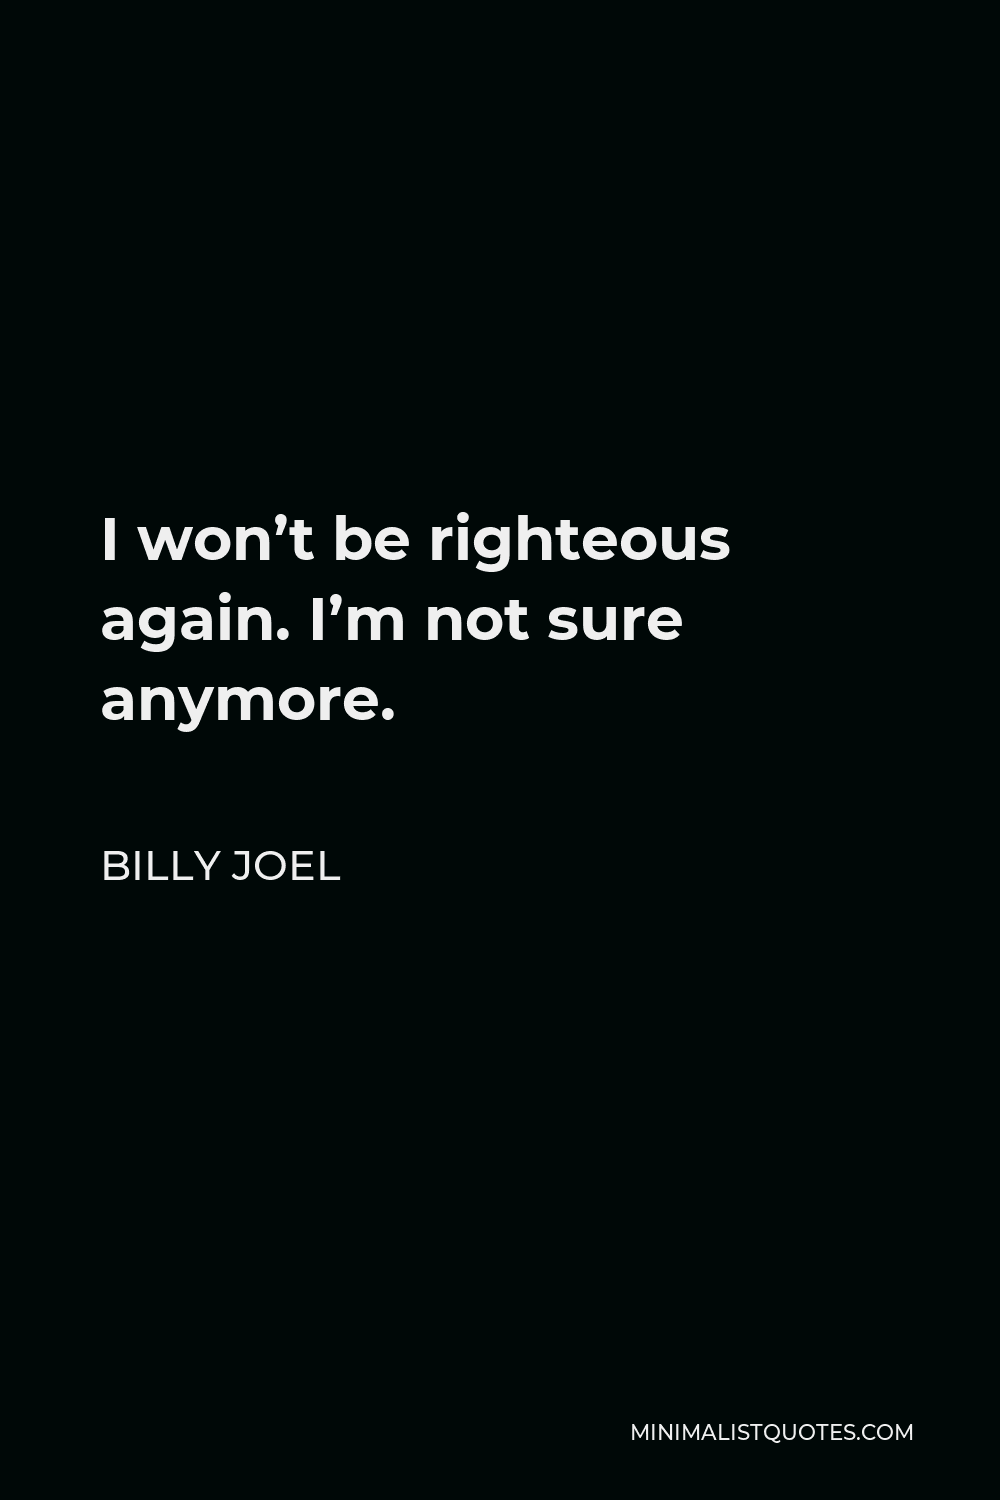 Billy Joel Quote - I won’t be righteous again. I’m not sure anymore.